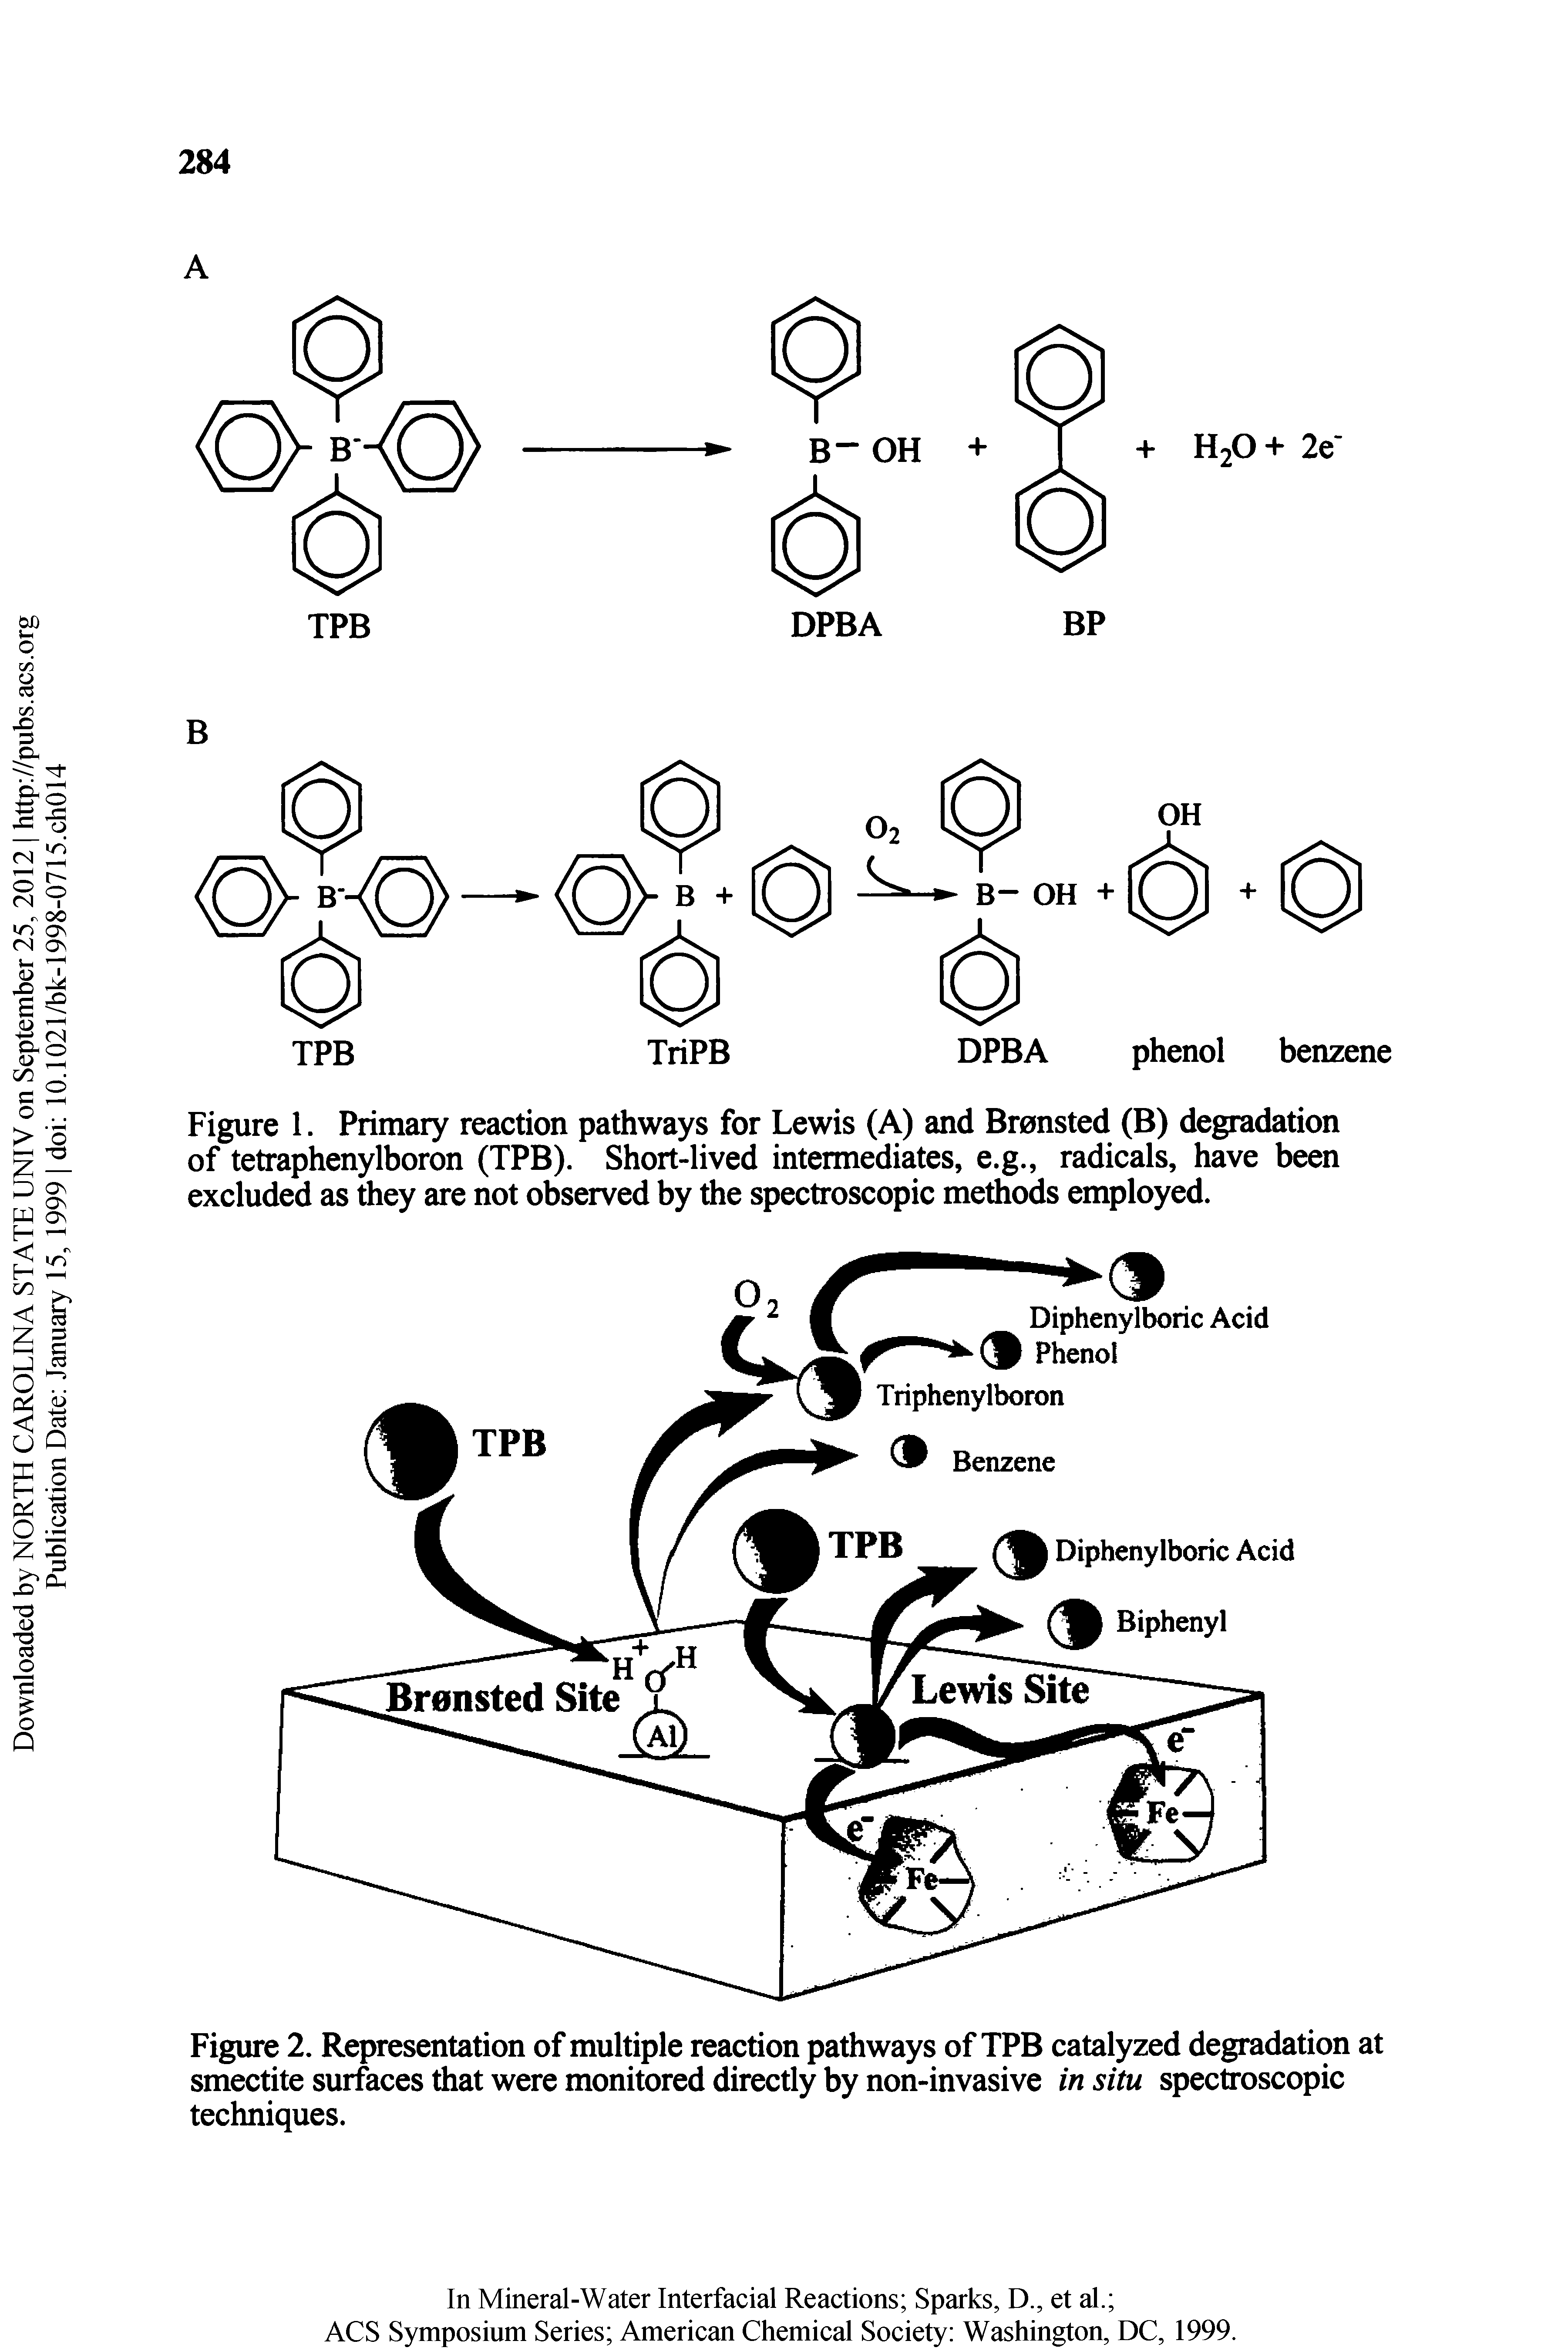 Figure 2. Representation of multiple reaction pathways of TPB catalyzed degradation at smectite surfaces that were monitored directly by non-invasive in situ spectroscopic techniques.